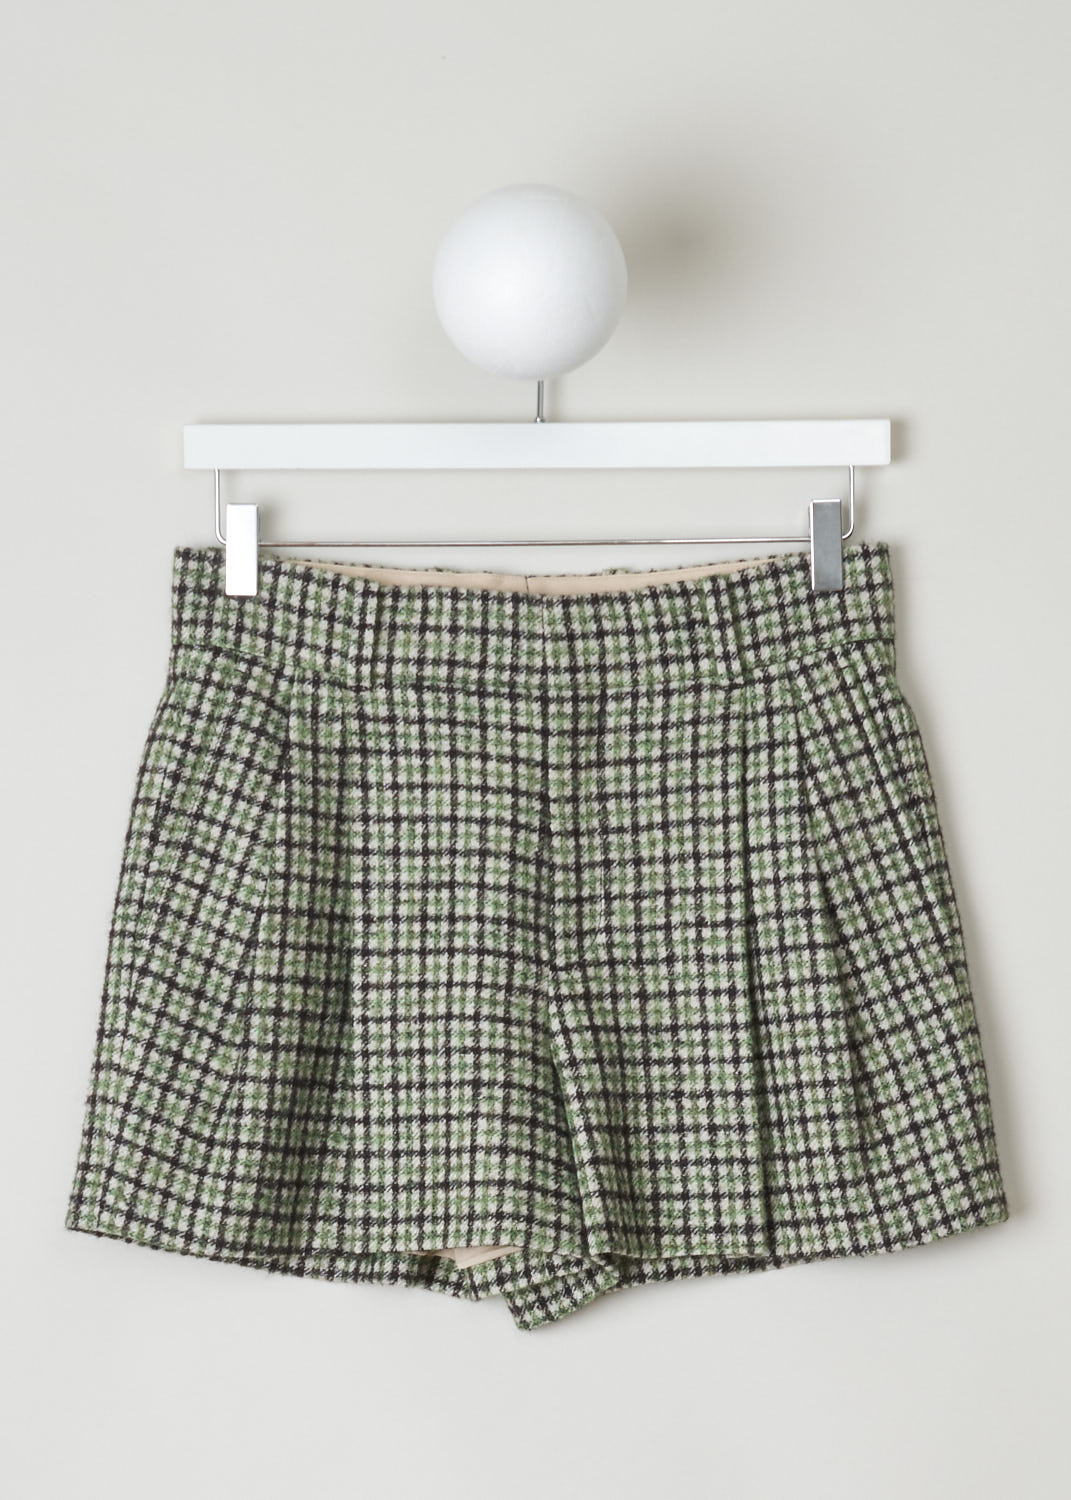 CHLOÃ‰, VIBRANT GREEN CHECK SHORTS, CHC21ASH2106439T38, Green, Print, Front, These beautiful vibrant green check shorts are soft to the touch. There is a concealed front closure with two hooks and a zipper and the shorts also have belt loops. The front of the shorts is decorated with pleats. Two forward slanted pockets can also be found in the front and two welt pockets on the back. 